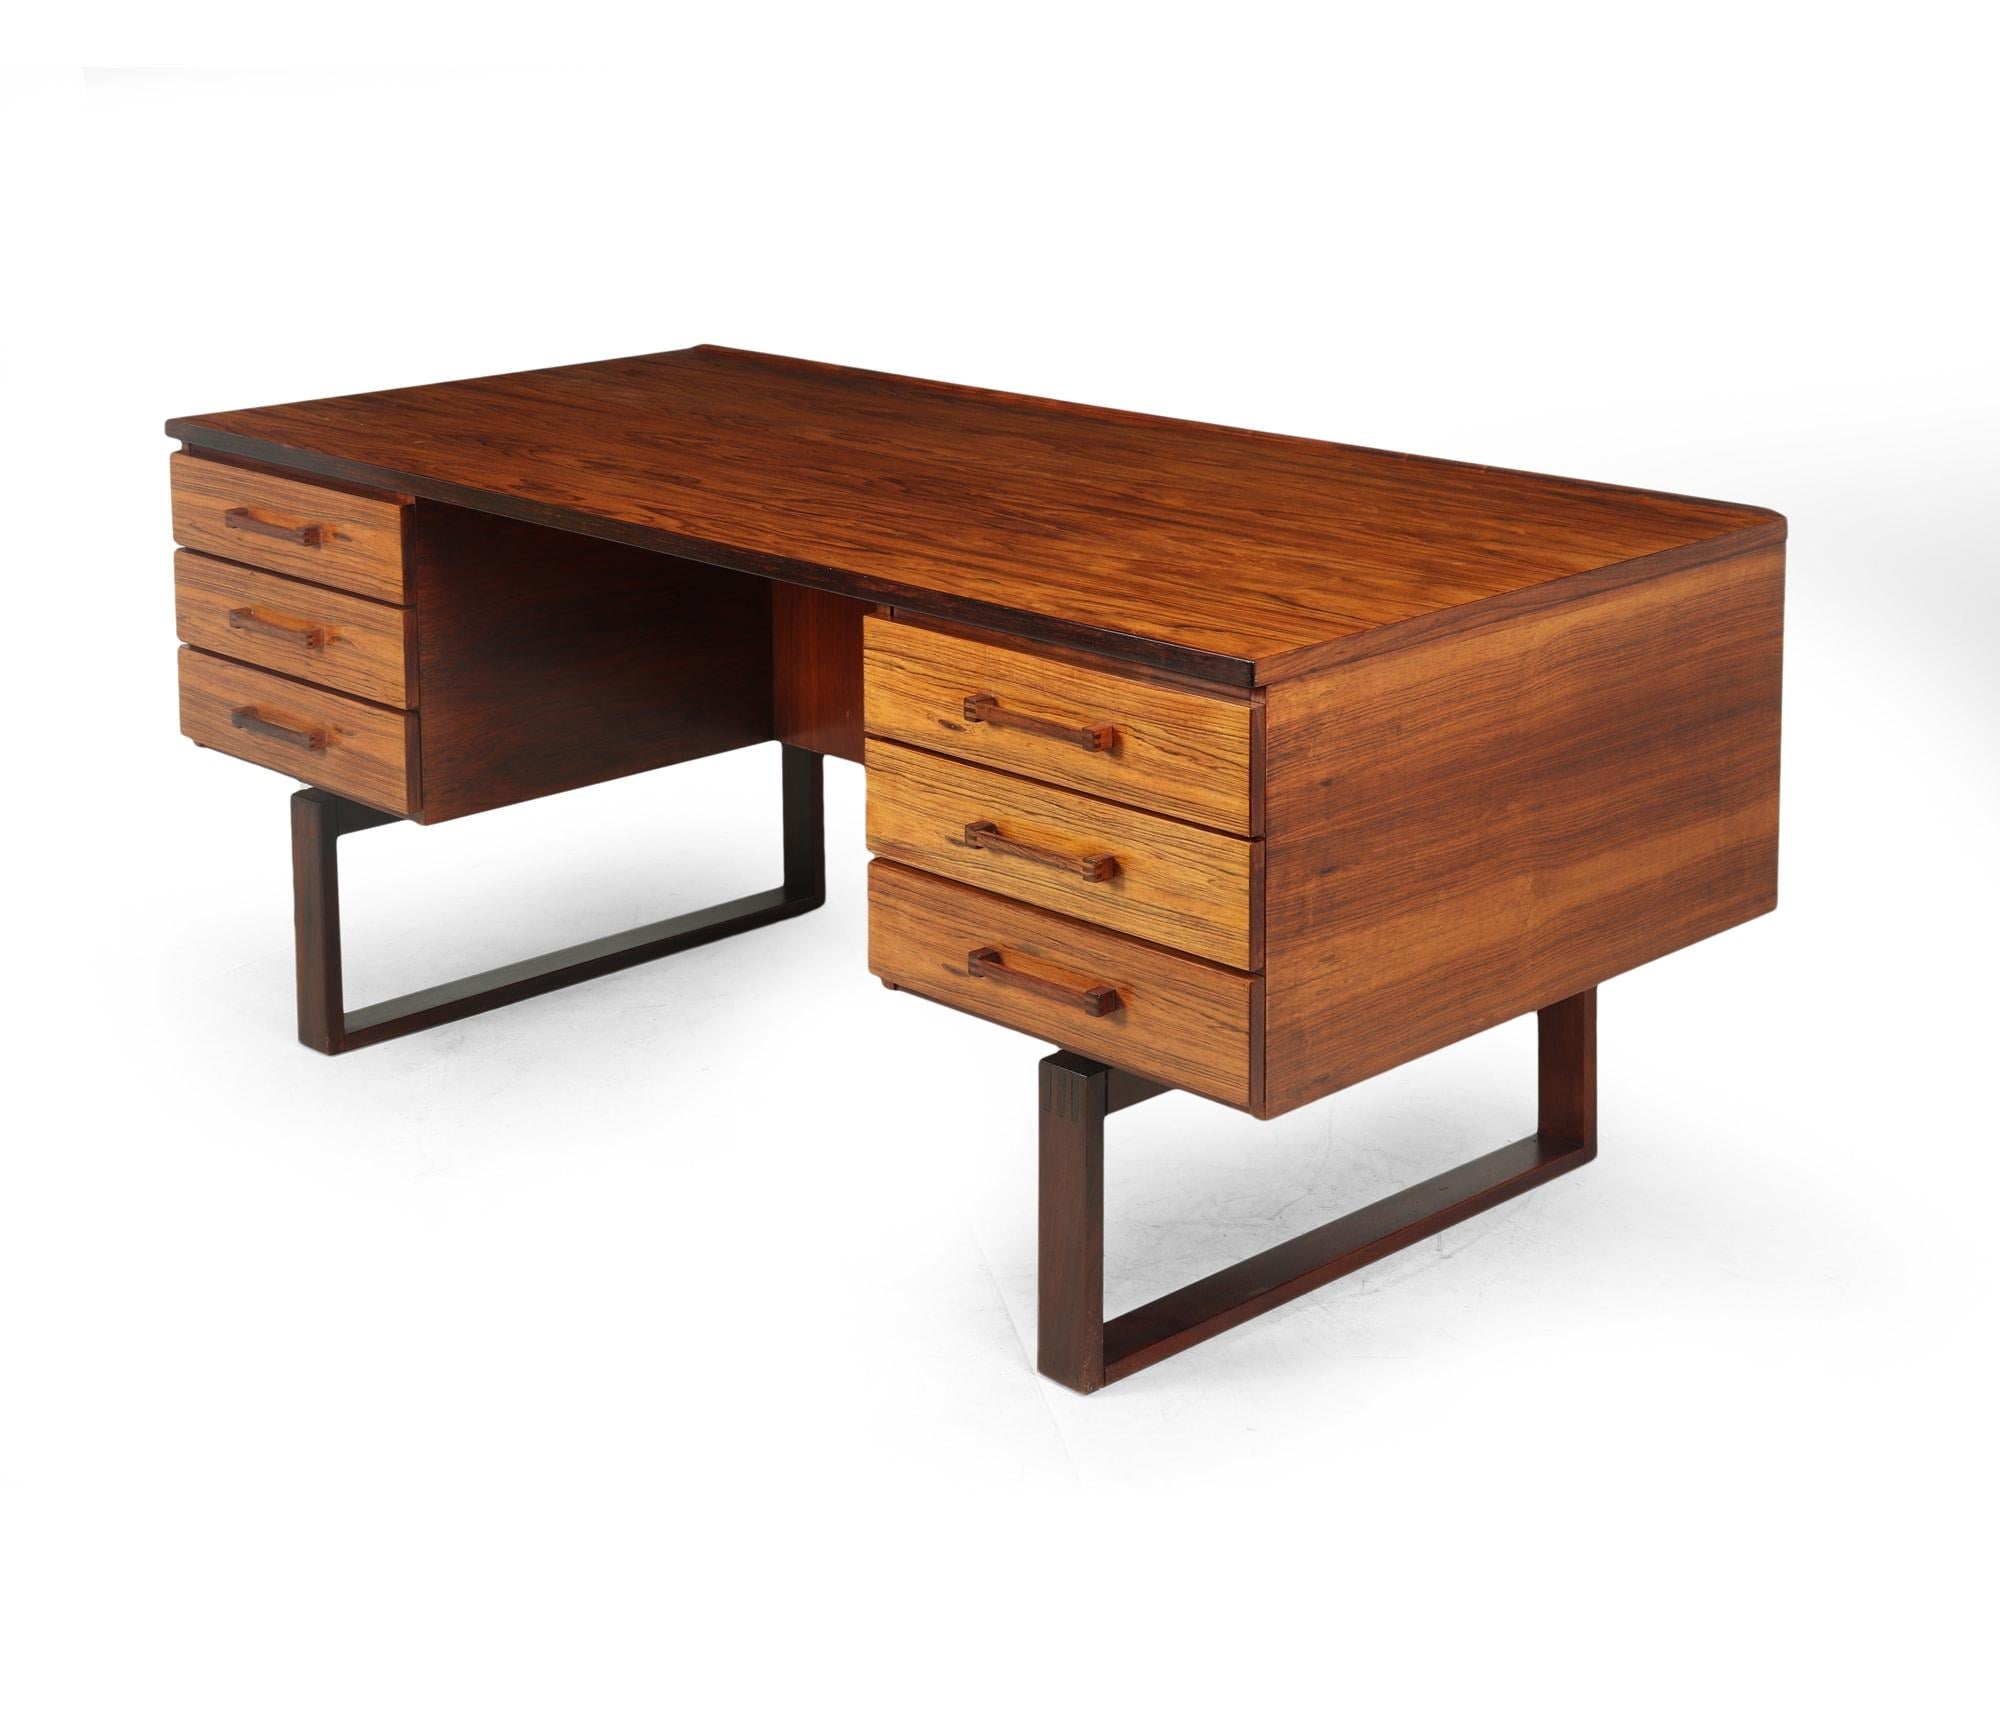 A classic six drawer mid century Danish desk in rosewood by Henning Jensen and Torbin Valeur featuring finger jointed handles and sled legs, raised lip to the back with bookshelf below, the desk has be restored where necessary and polished by hand